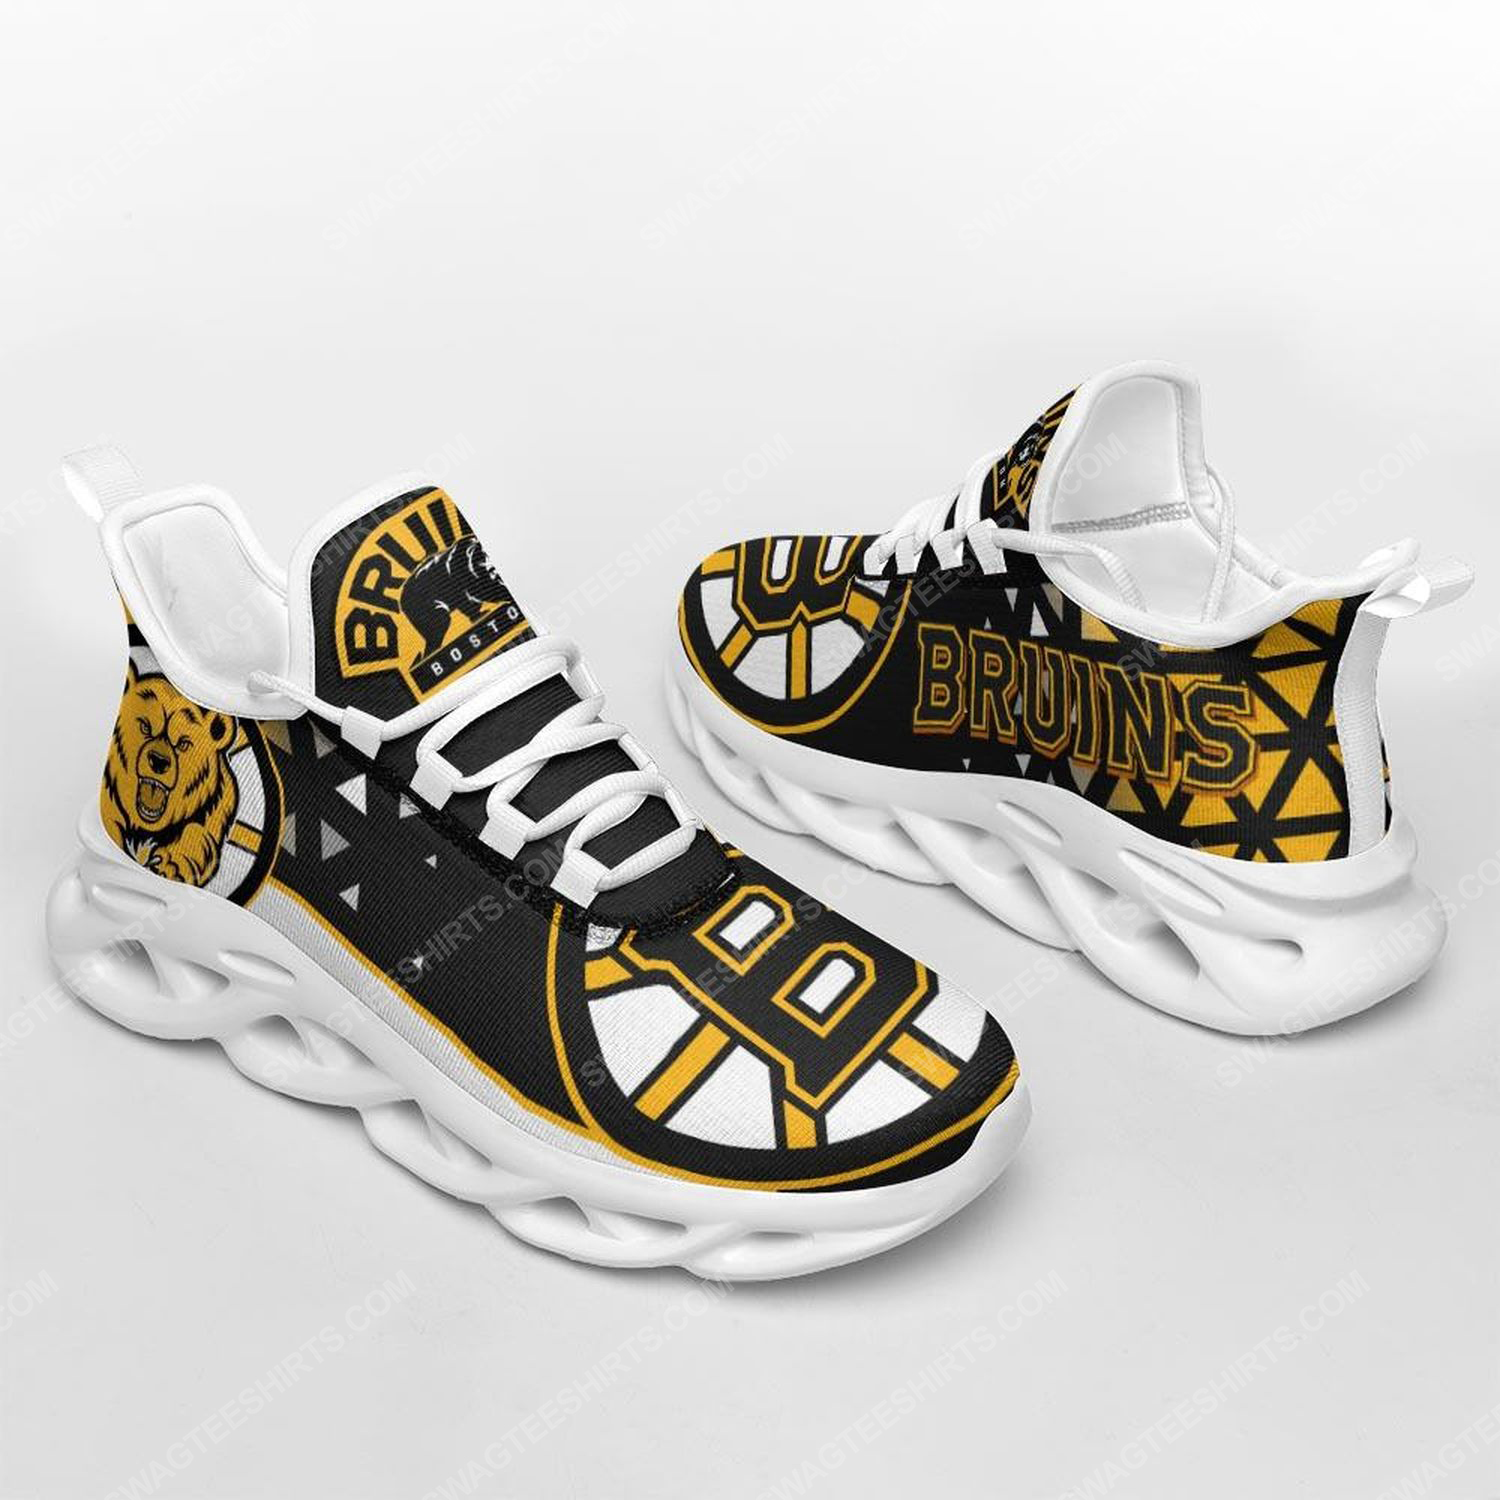 [special edition] The boston bruins hockey team max soul shoes – Maria